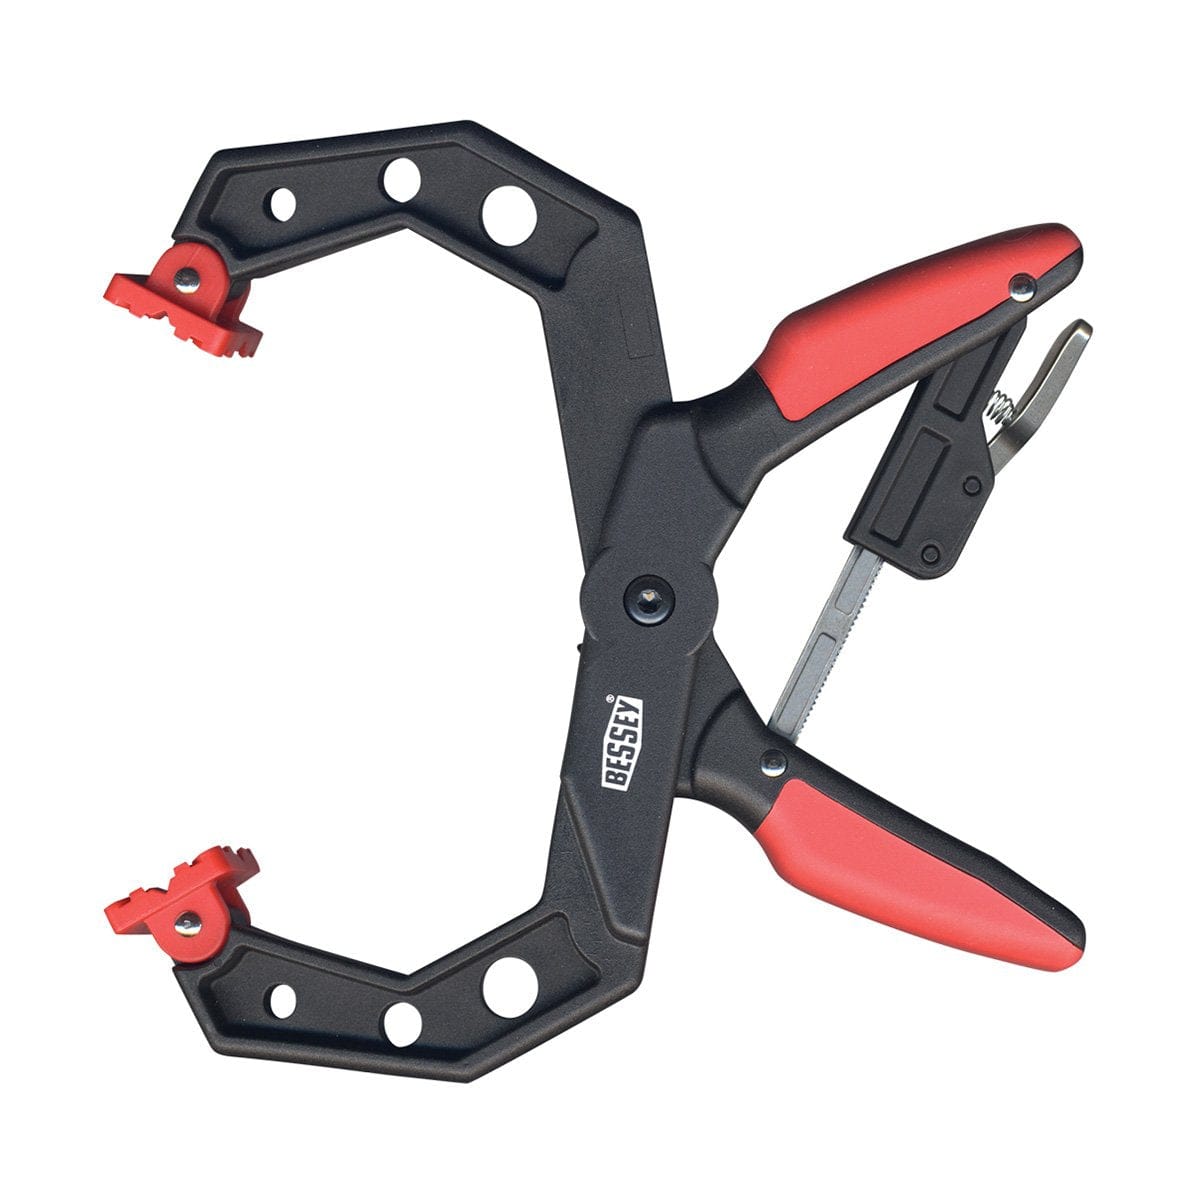 Bessey Tools XCRG4 Clamp Ratcheting Spring Clamp